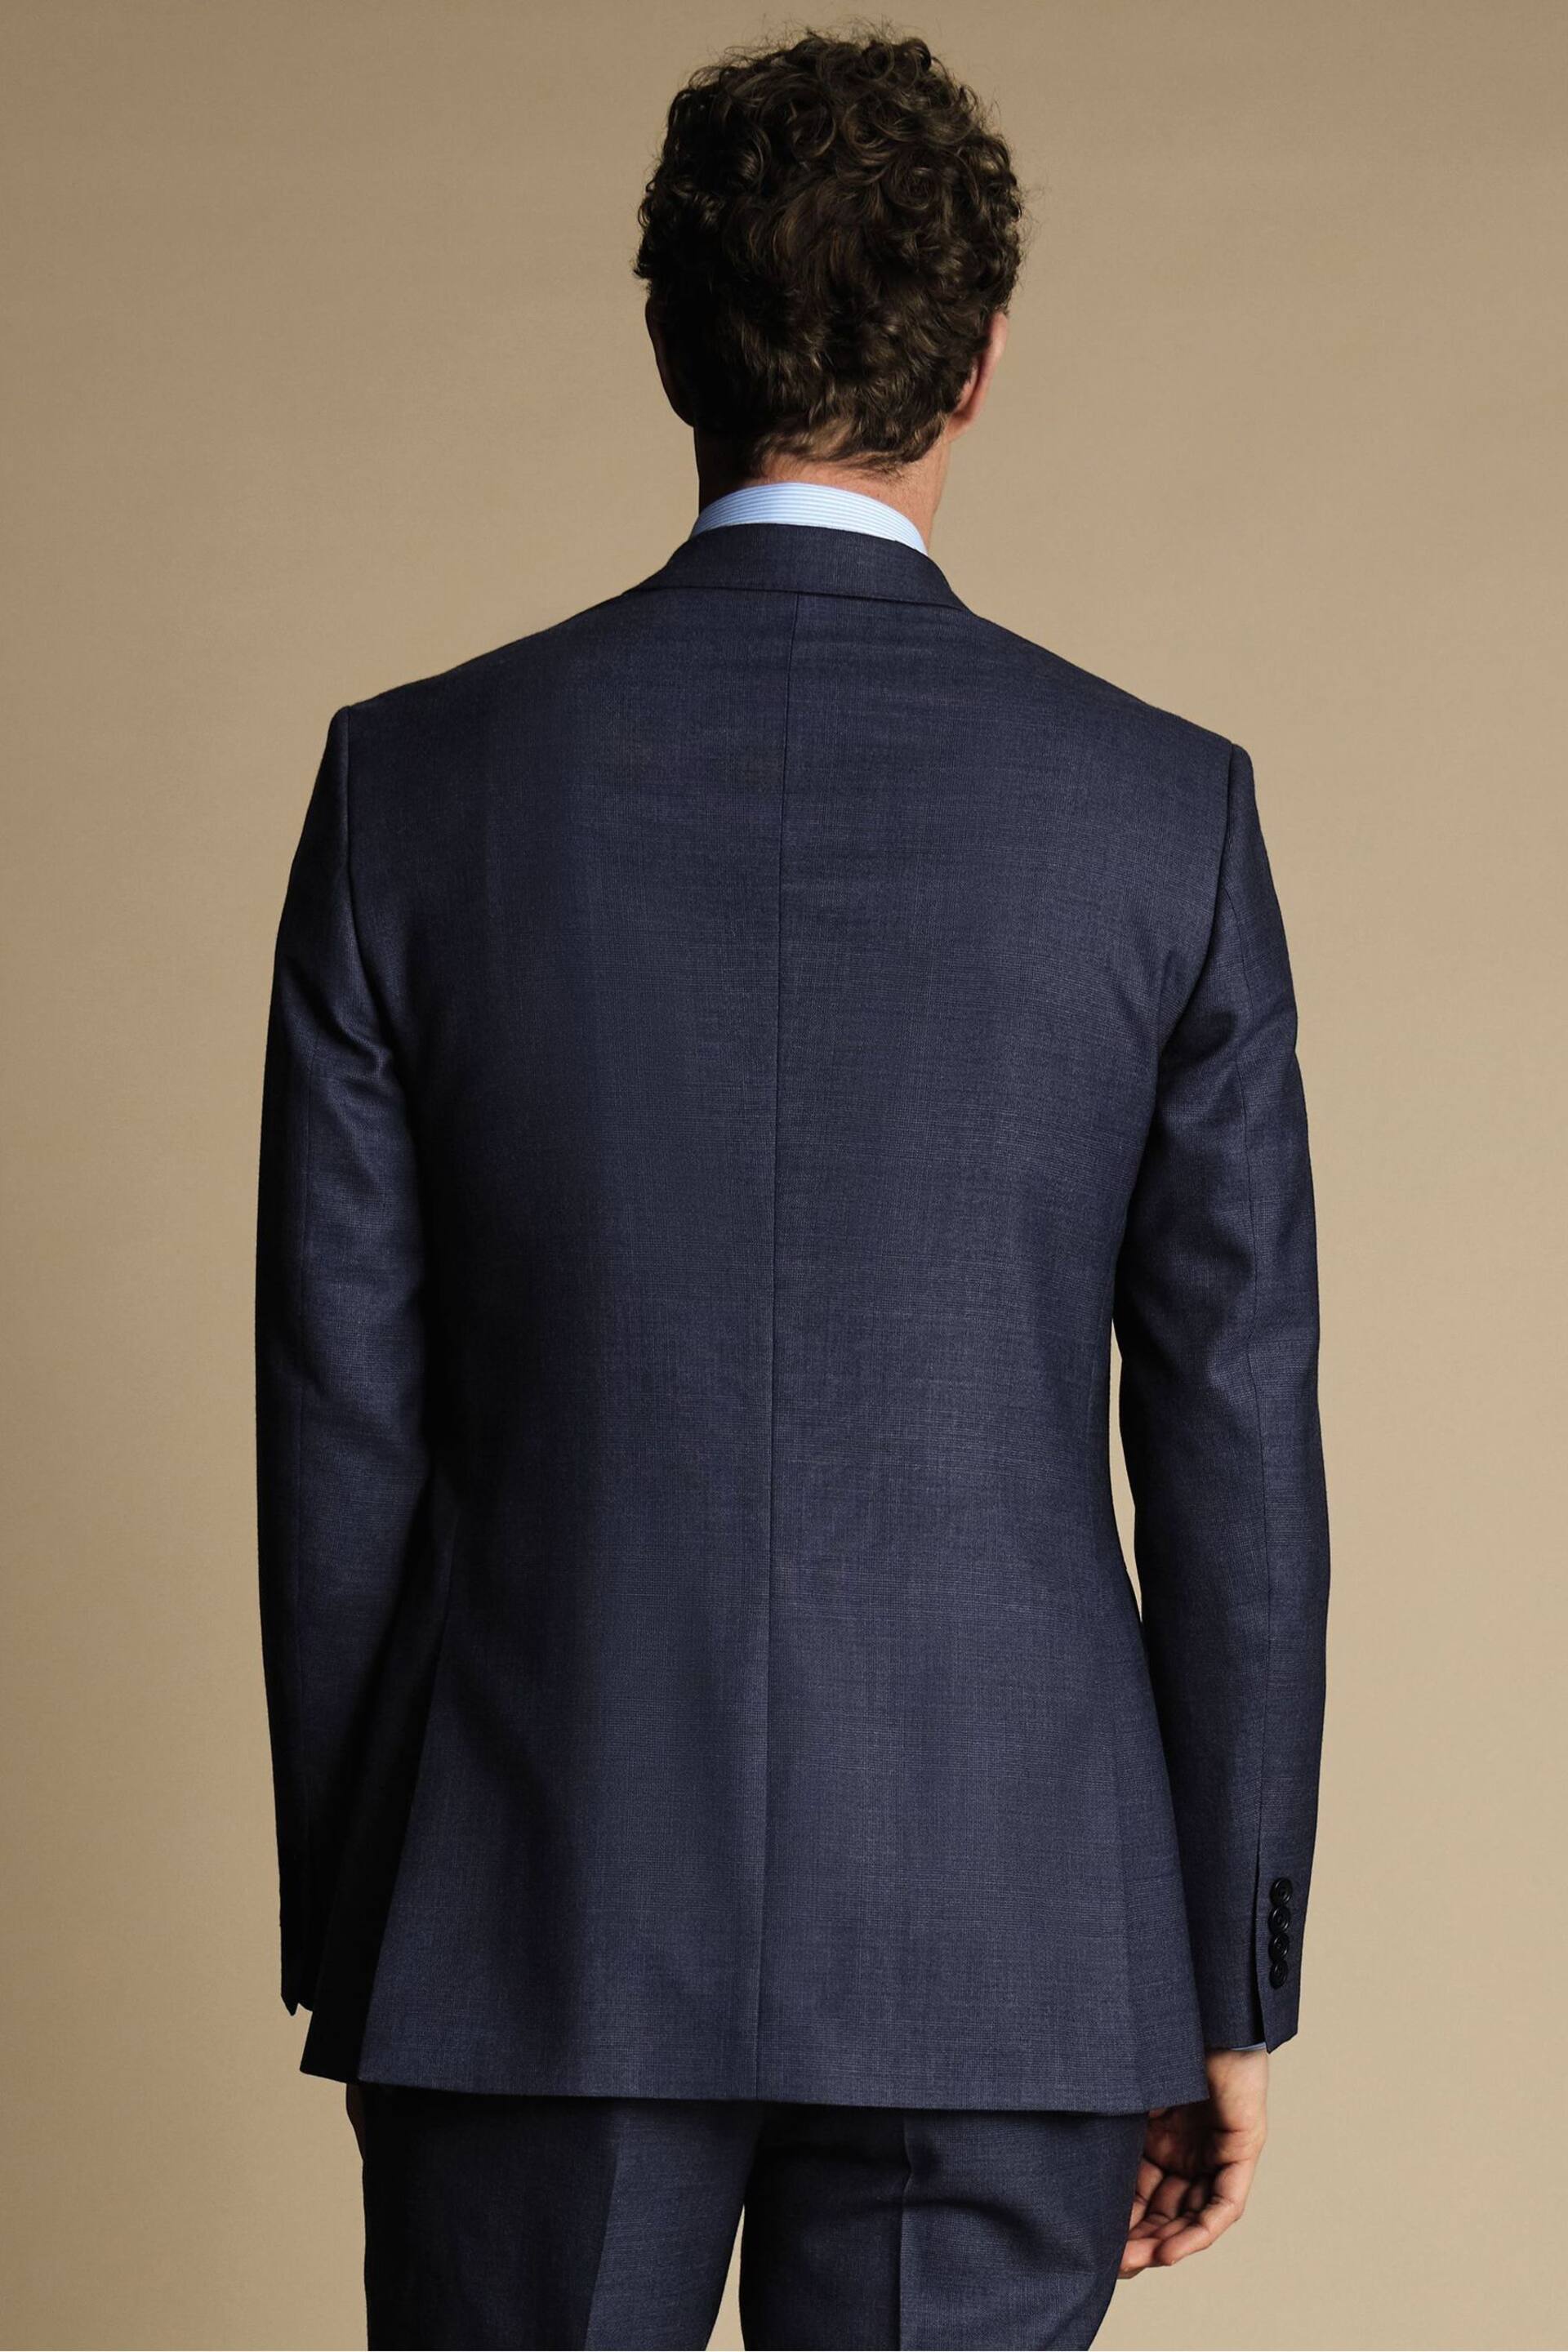 Charles Tyrwhitt Blue Slim-Fit Heather Prince of Wales Suit Jacket - Image 2 of 5